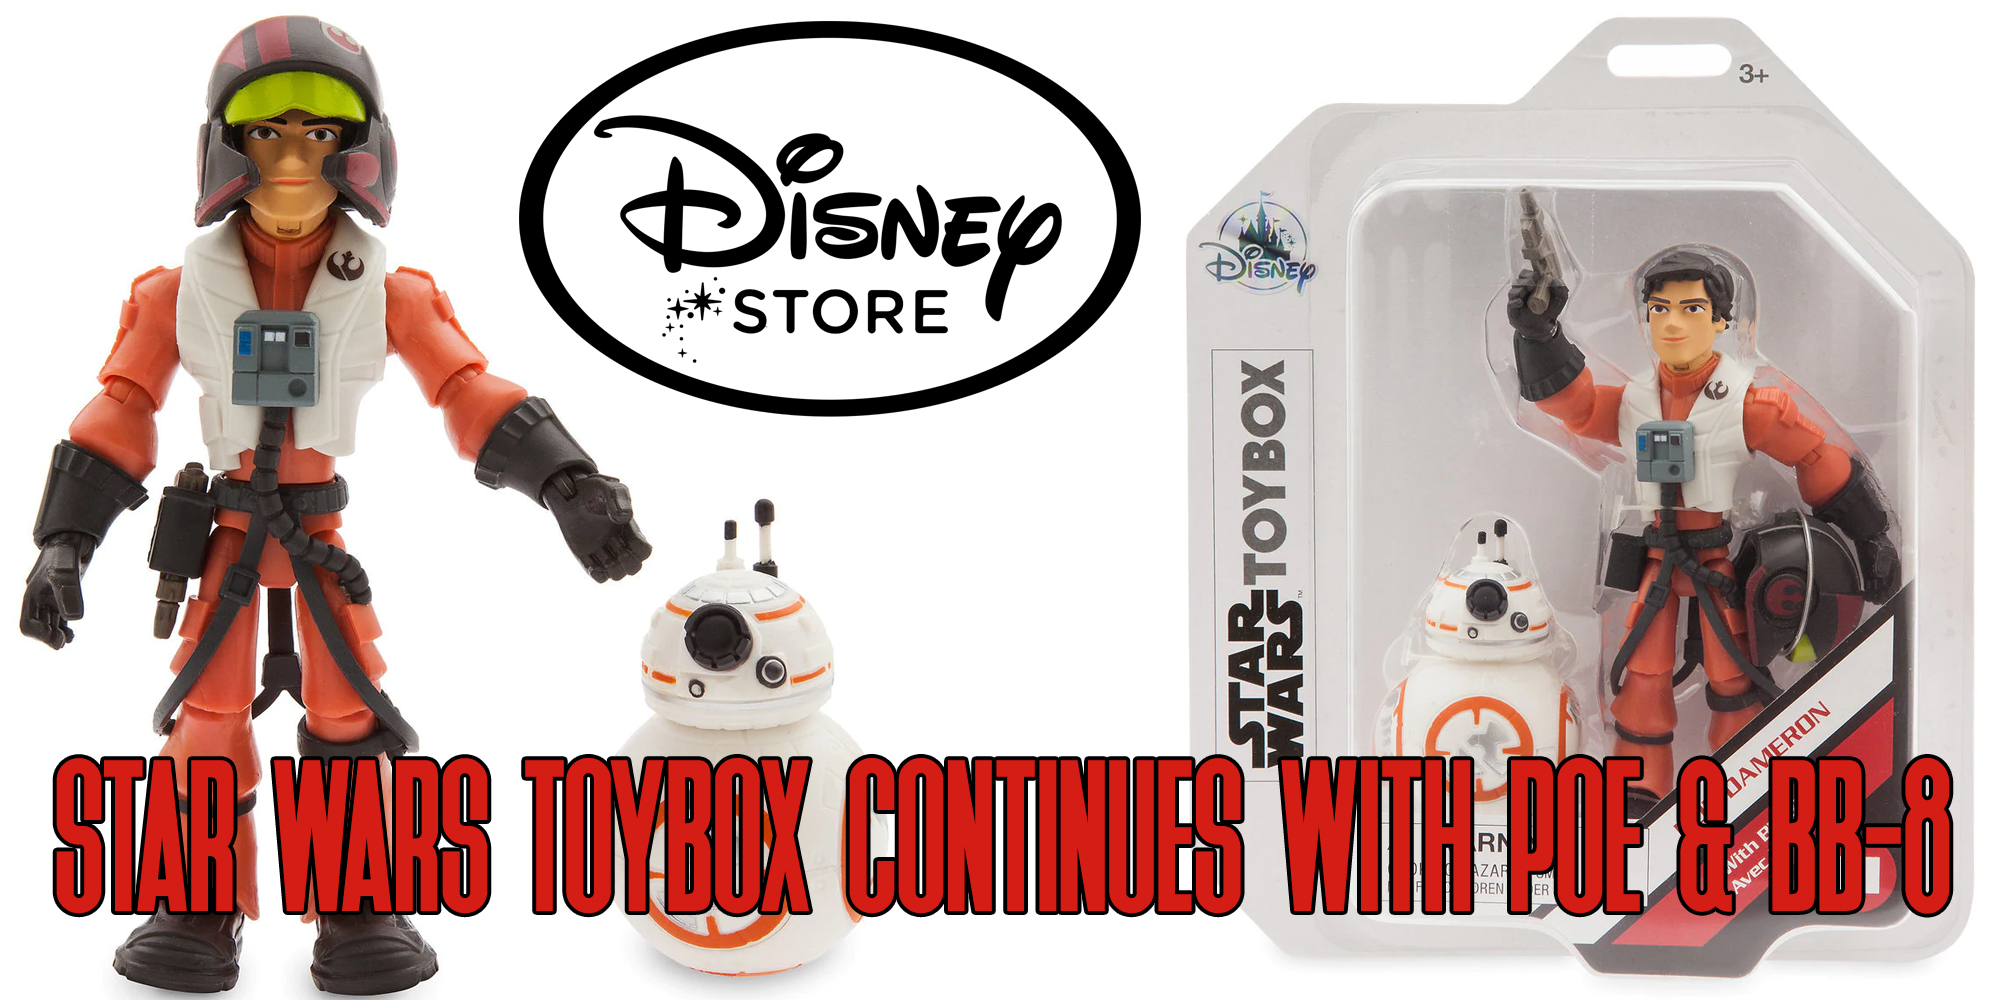 Disney Store's ToyBox Line Continues